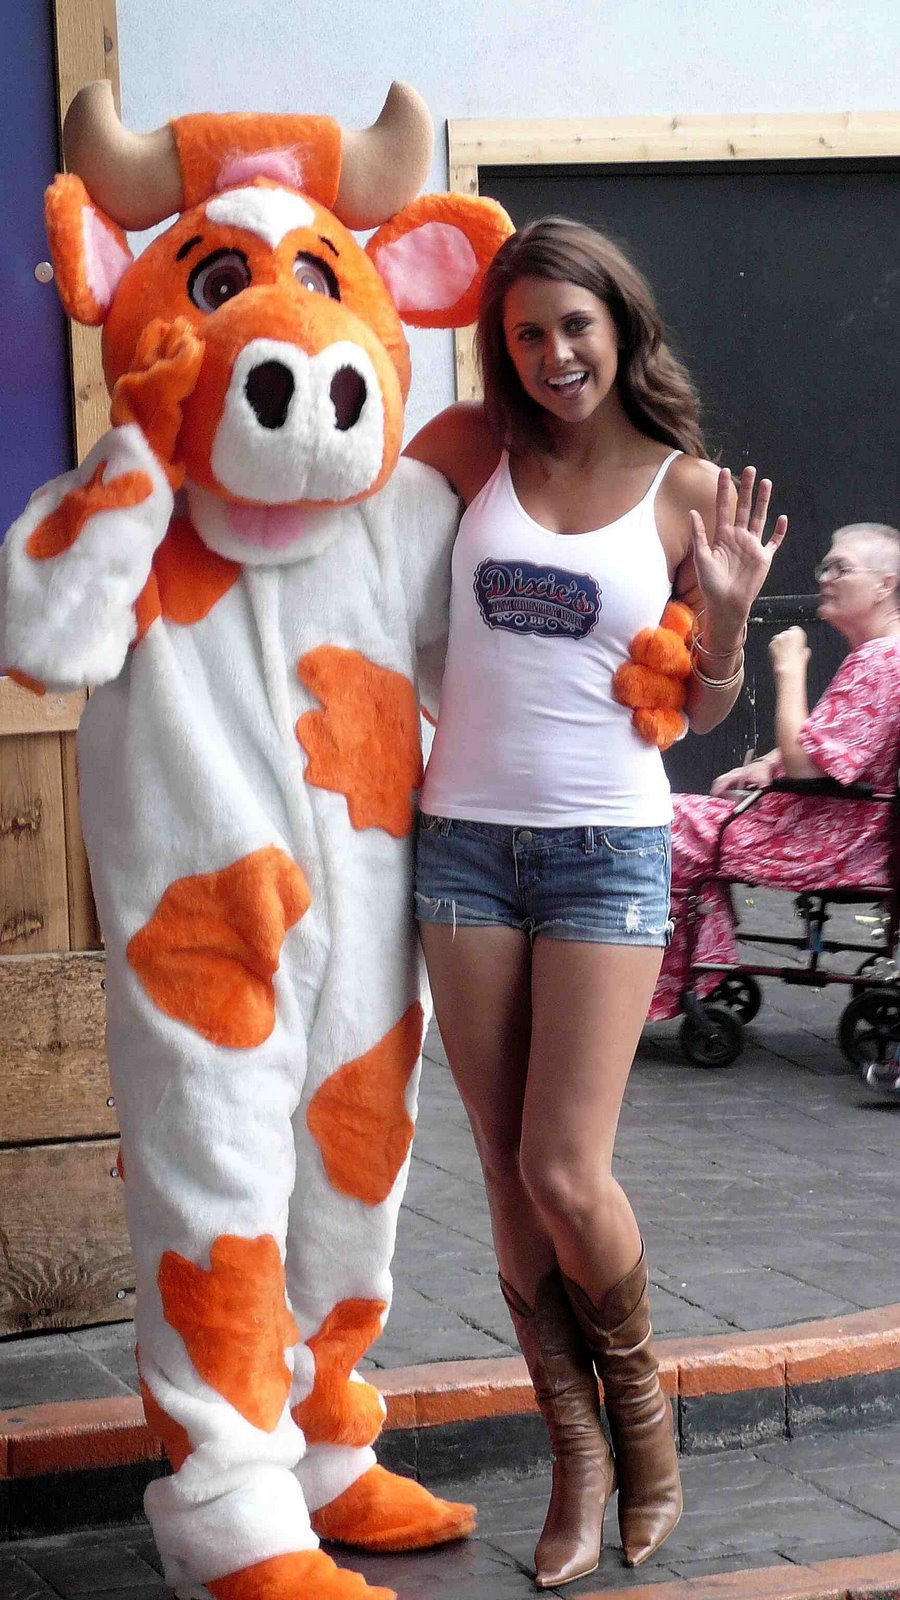 [Hooters+cow+event+May+23+2008_3.jpg]